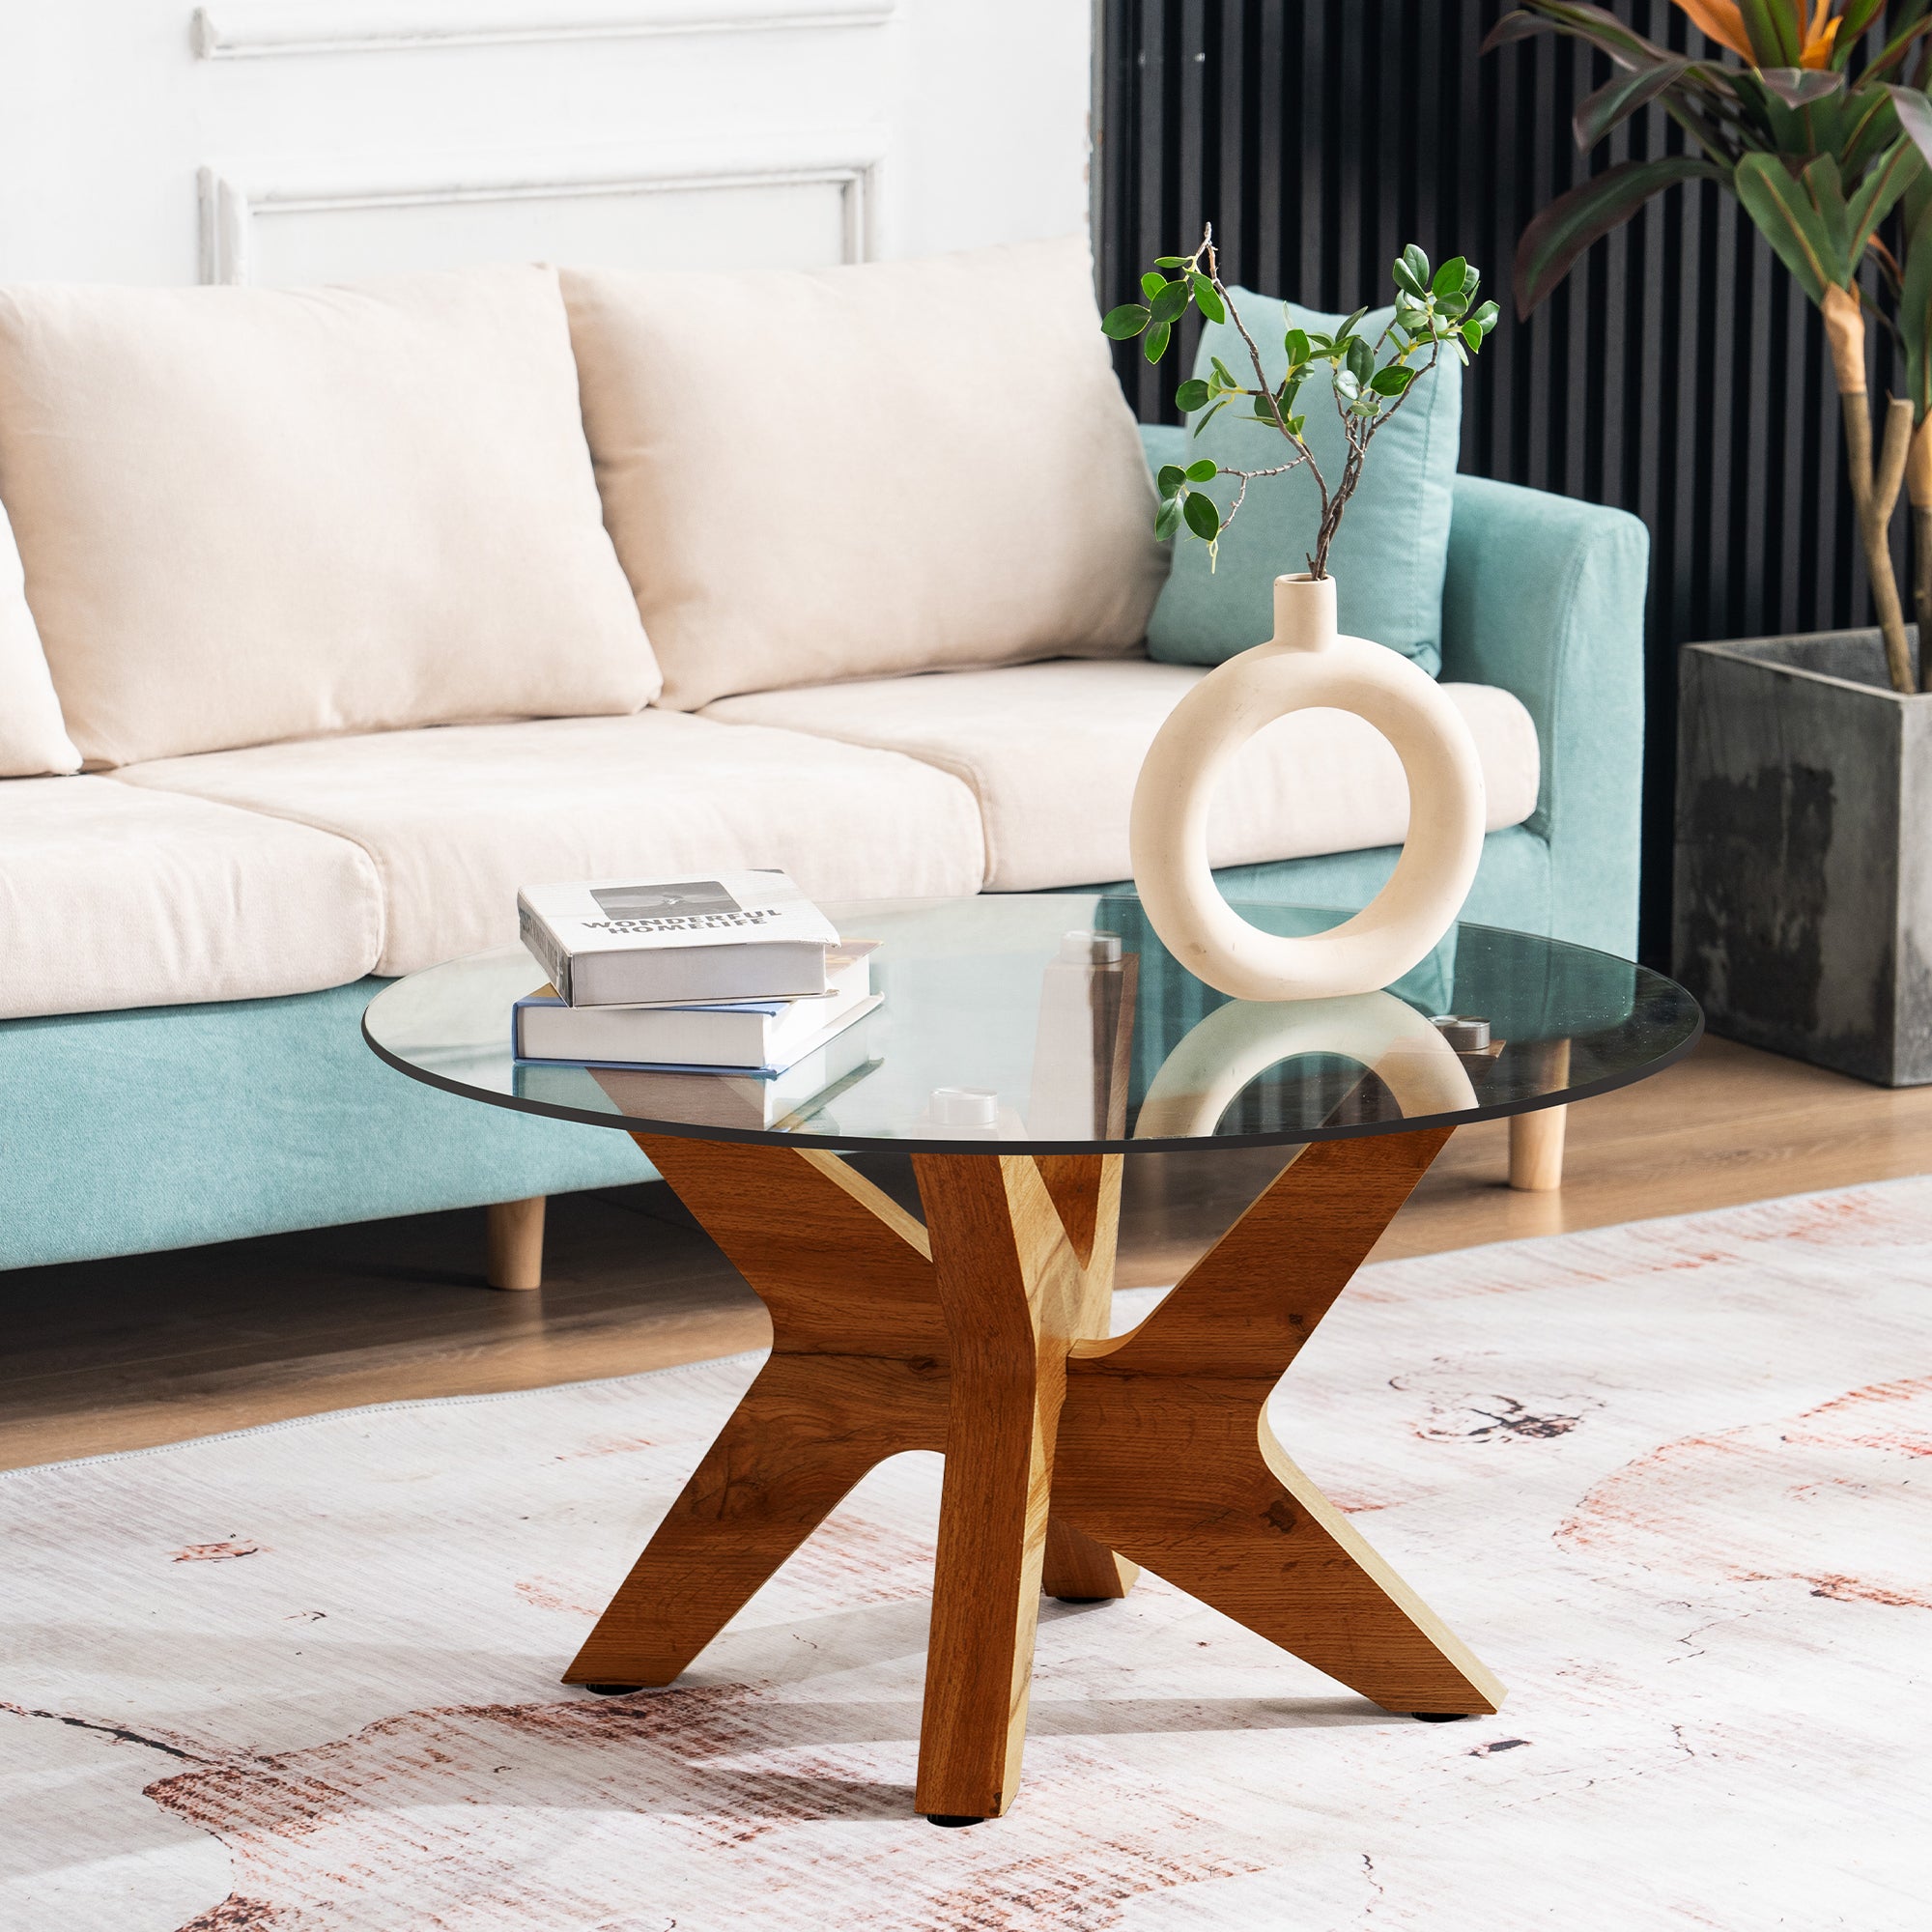 Ivinta Round Coffee Tables for Living Room, Glass Coffee Table for Home Office Cafe